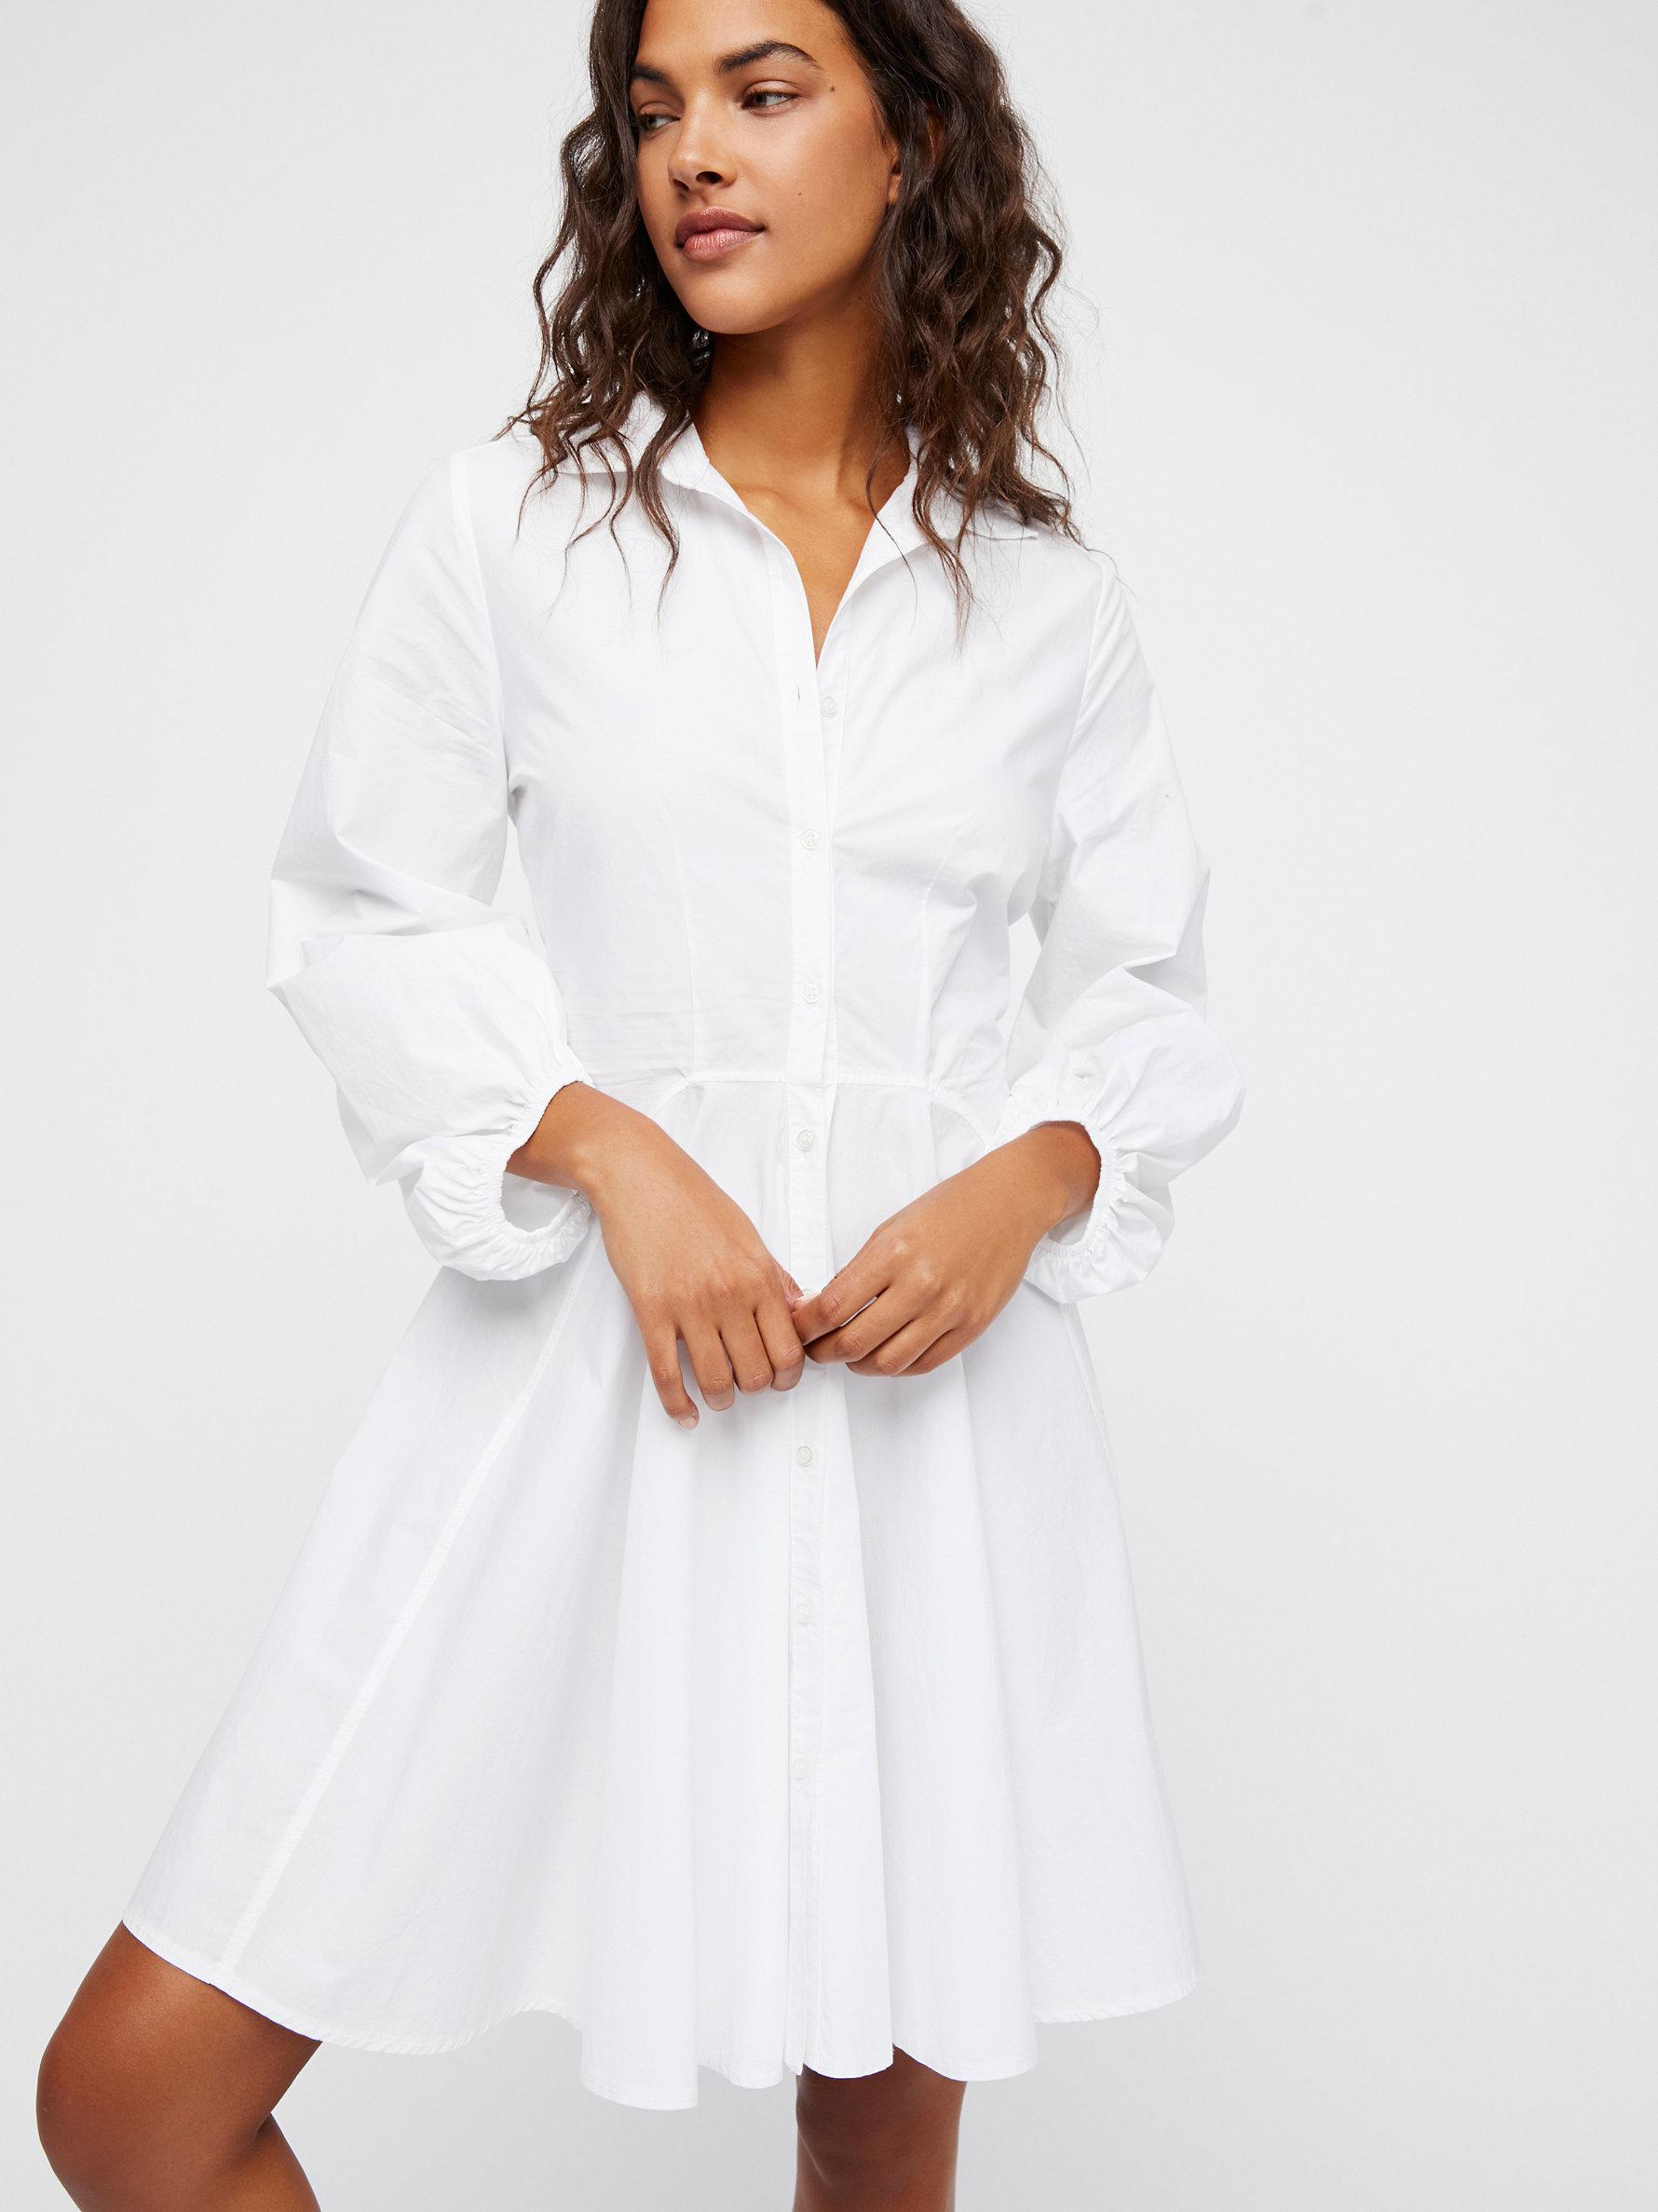 FREE PEOPLE All The Time New Tunic White Peplum Top – Pit-a-Pats.com